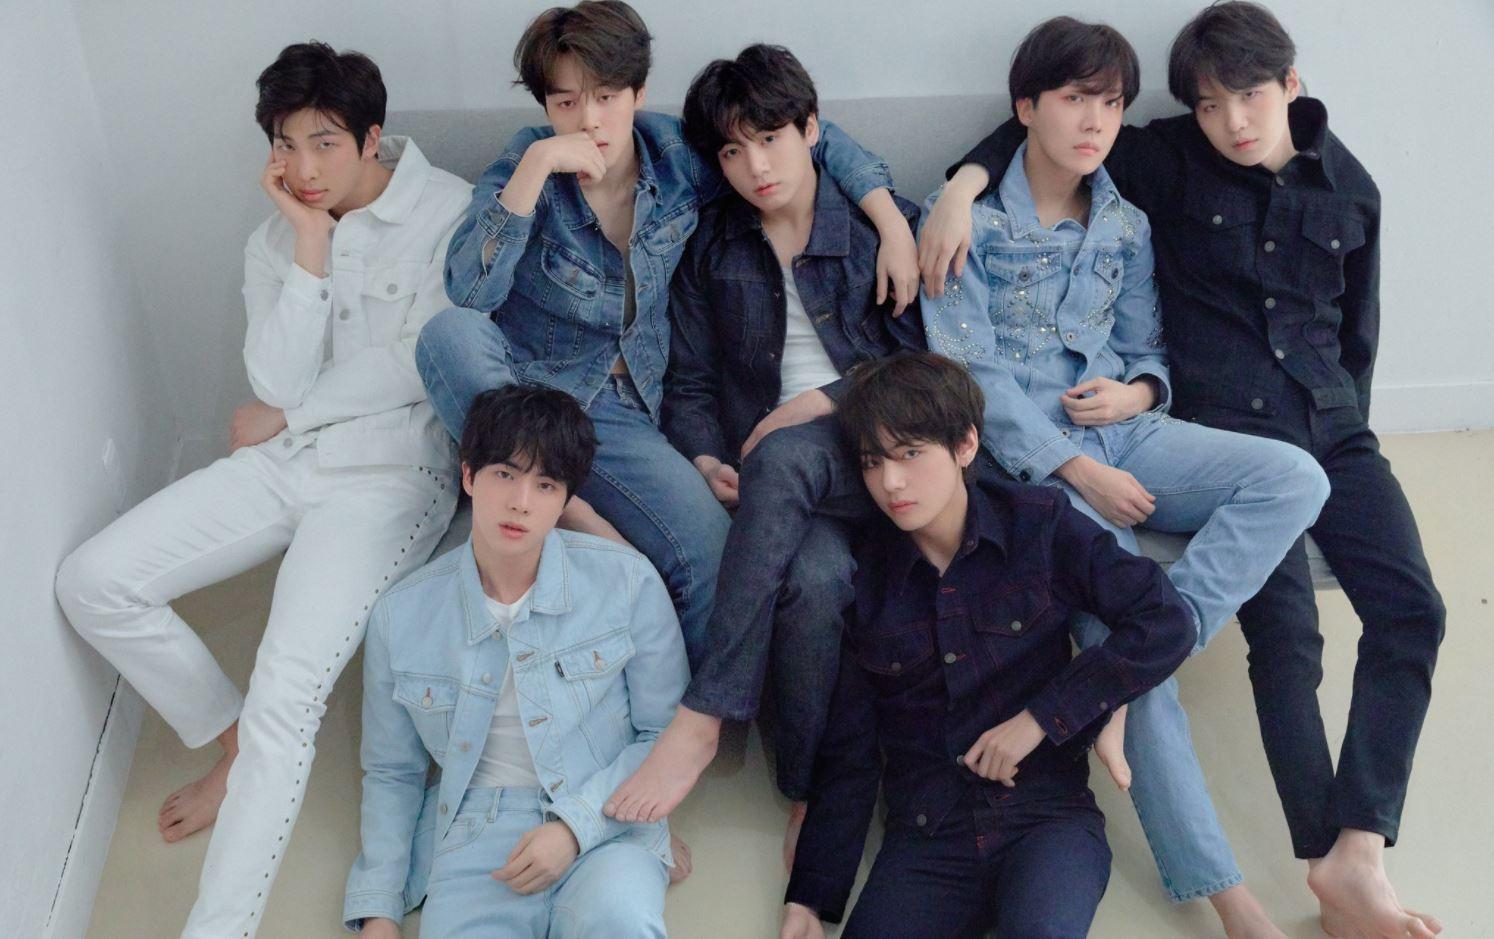 BTS release concept image R and O for Love Yourself: Tear